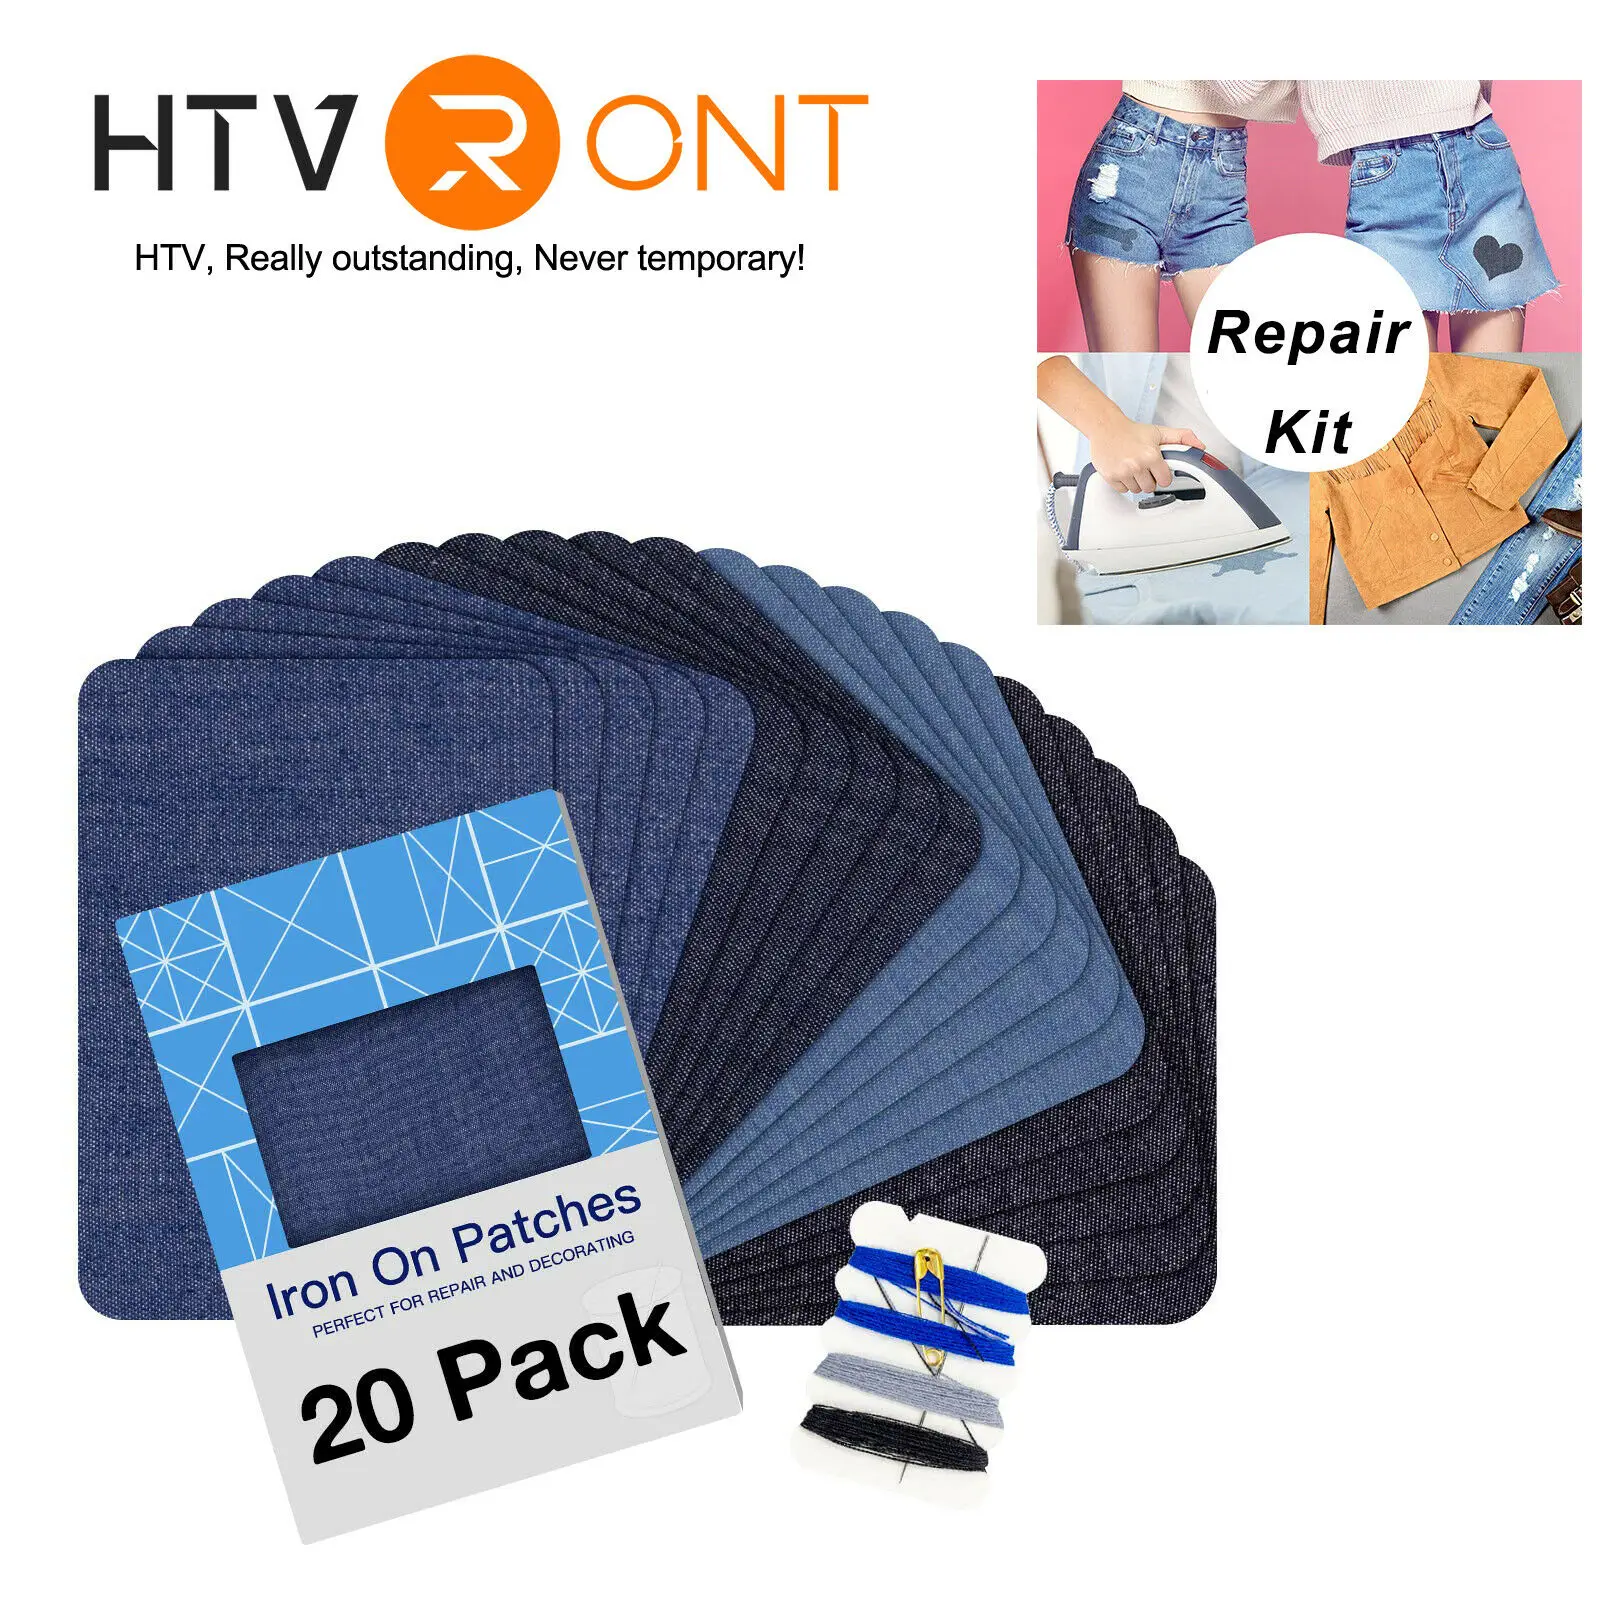 20pcs Jeans Denim Patches Iron On Elbow Knee Patches DIY Repair Kits For Clothing Pants Apparel Embroidered Sewing Fabric